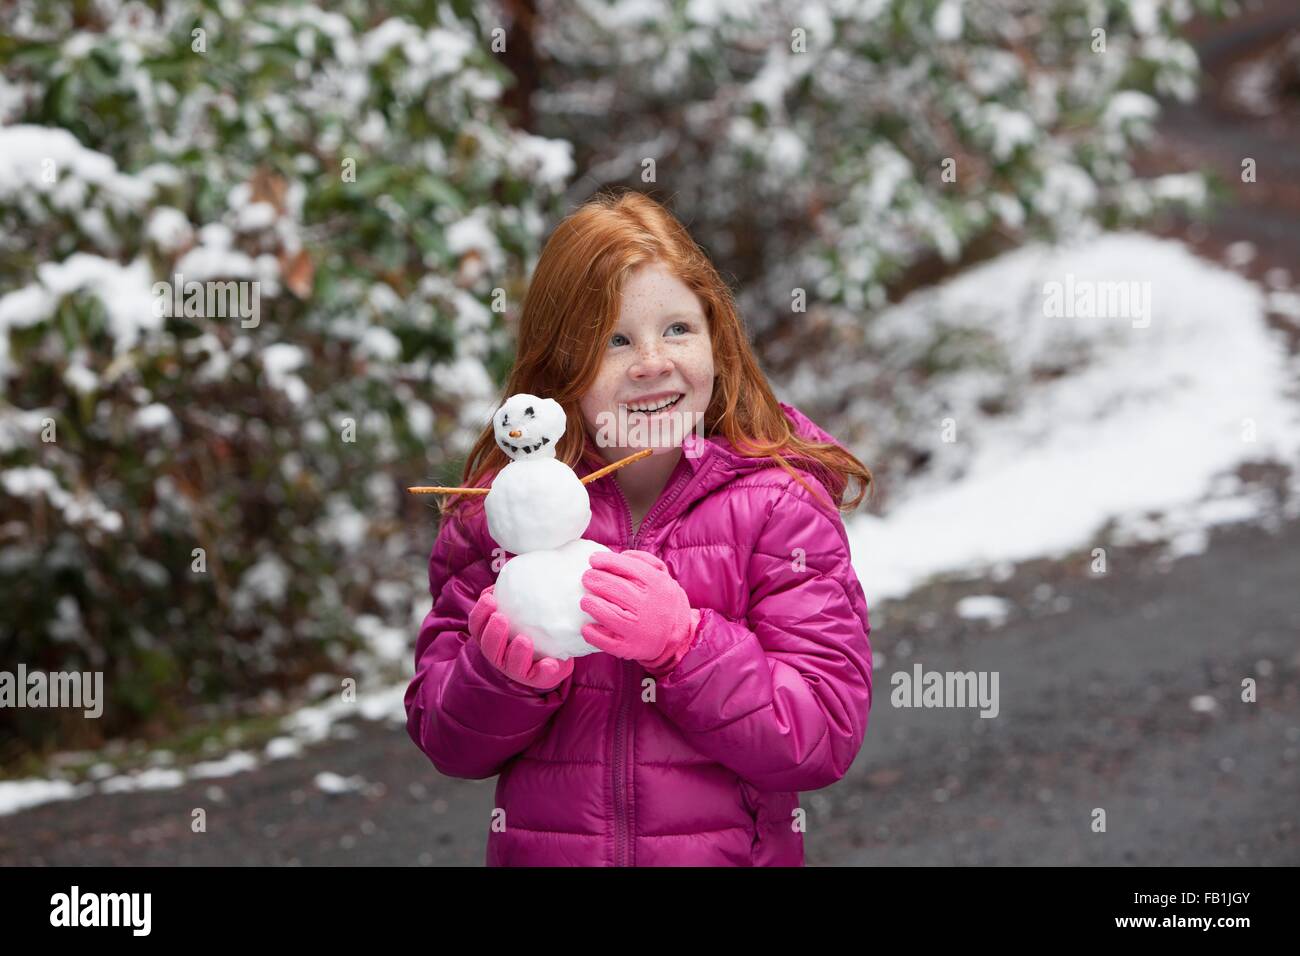 Red haired girl in front of snow covered trees, wearing pink gloves and padded jacket holding snowman looking away smiling Stock Photo